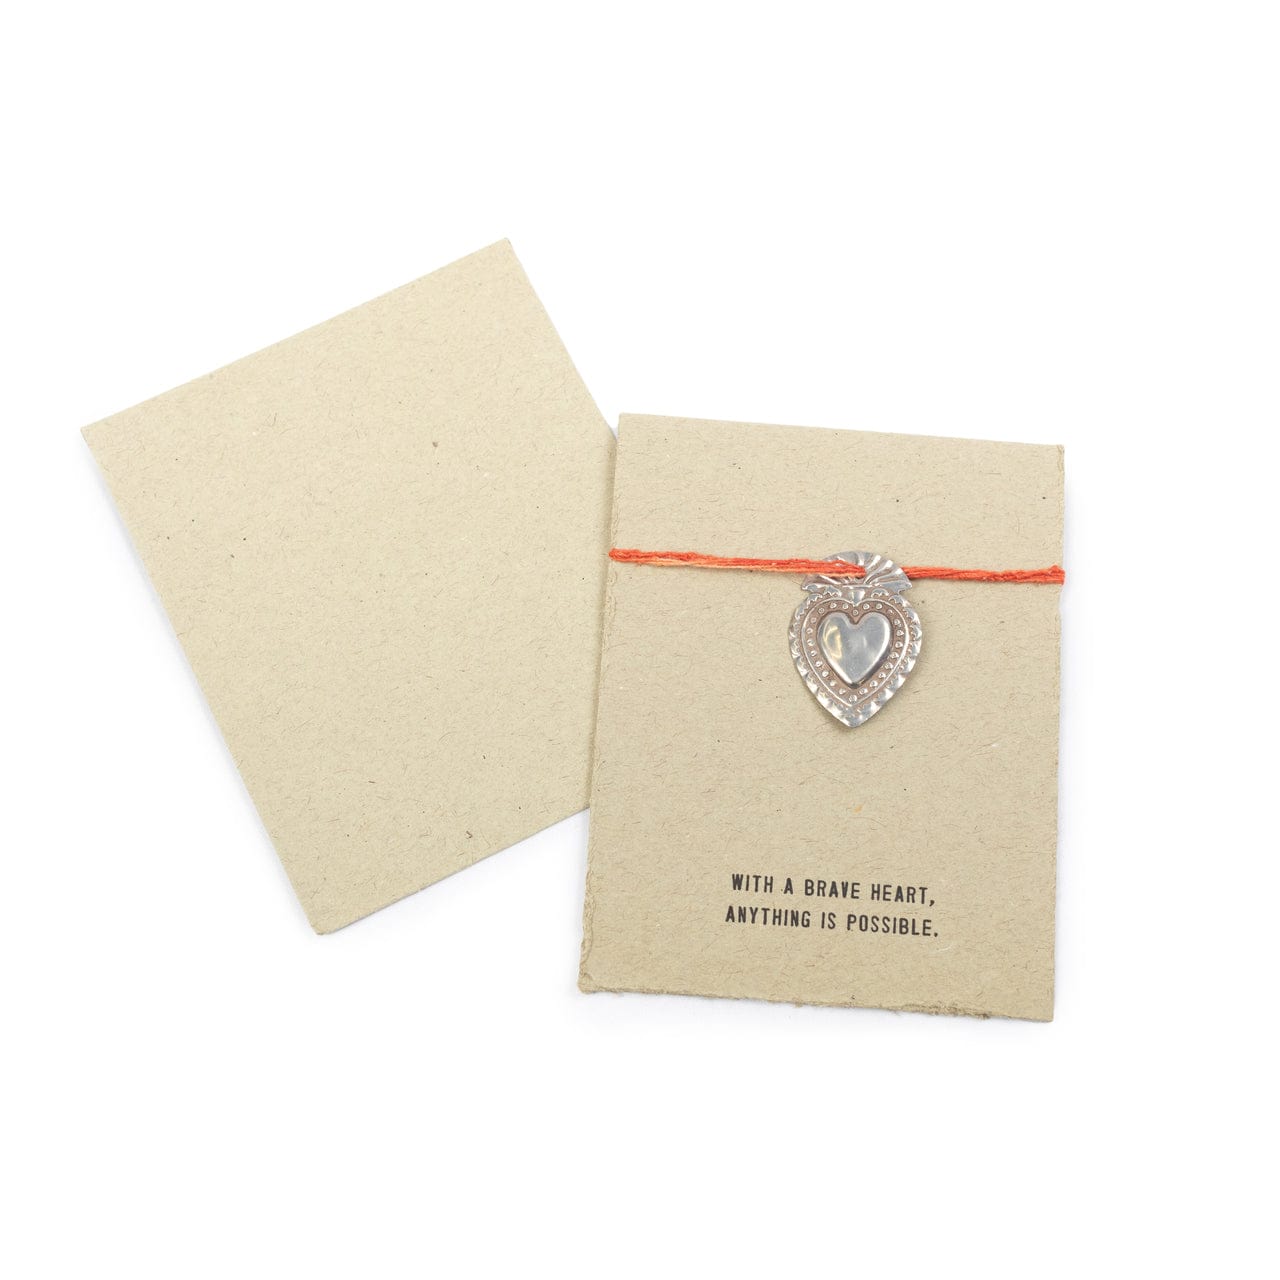 Milagro Heart Cards Sugarboo Designs Greeting Card brave heart